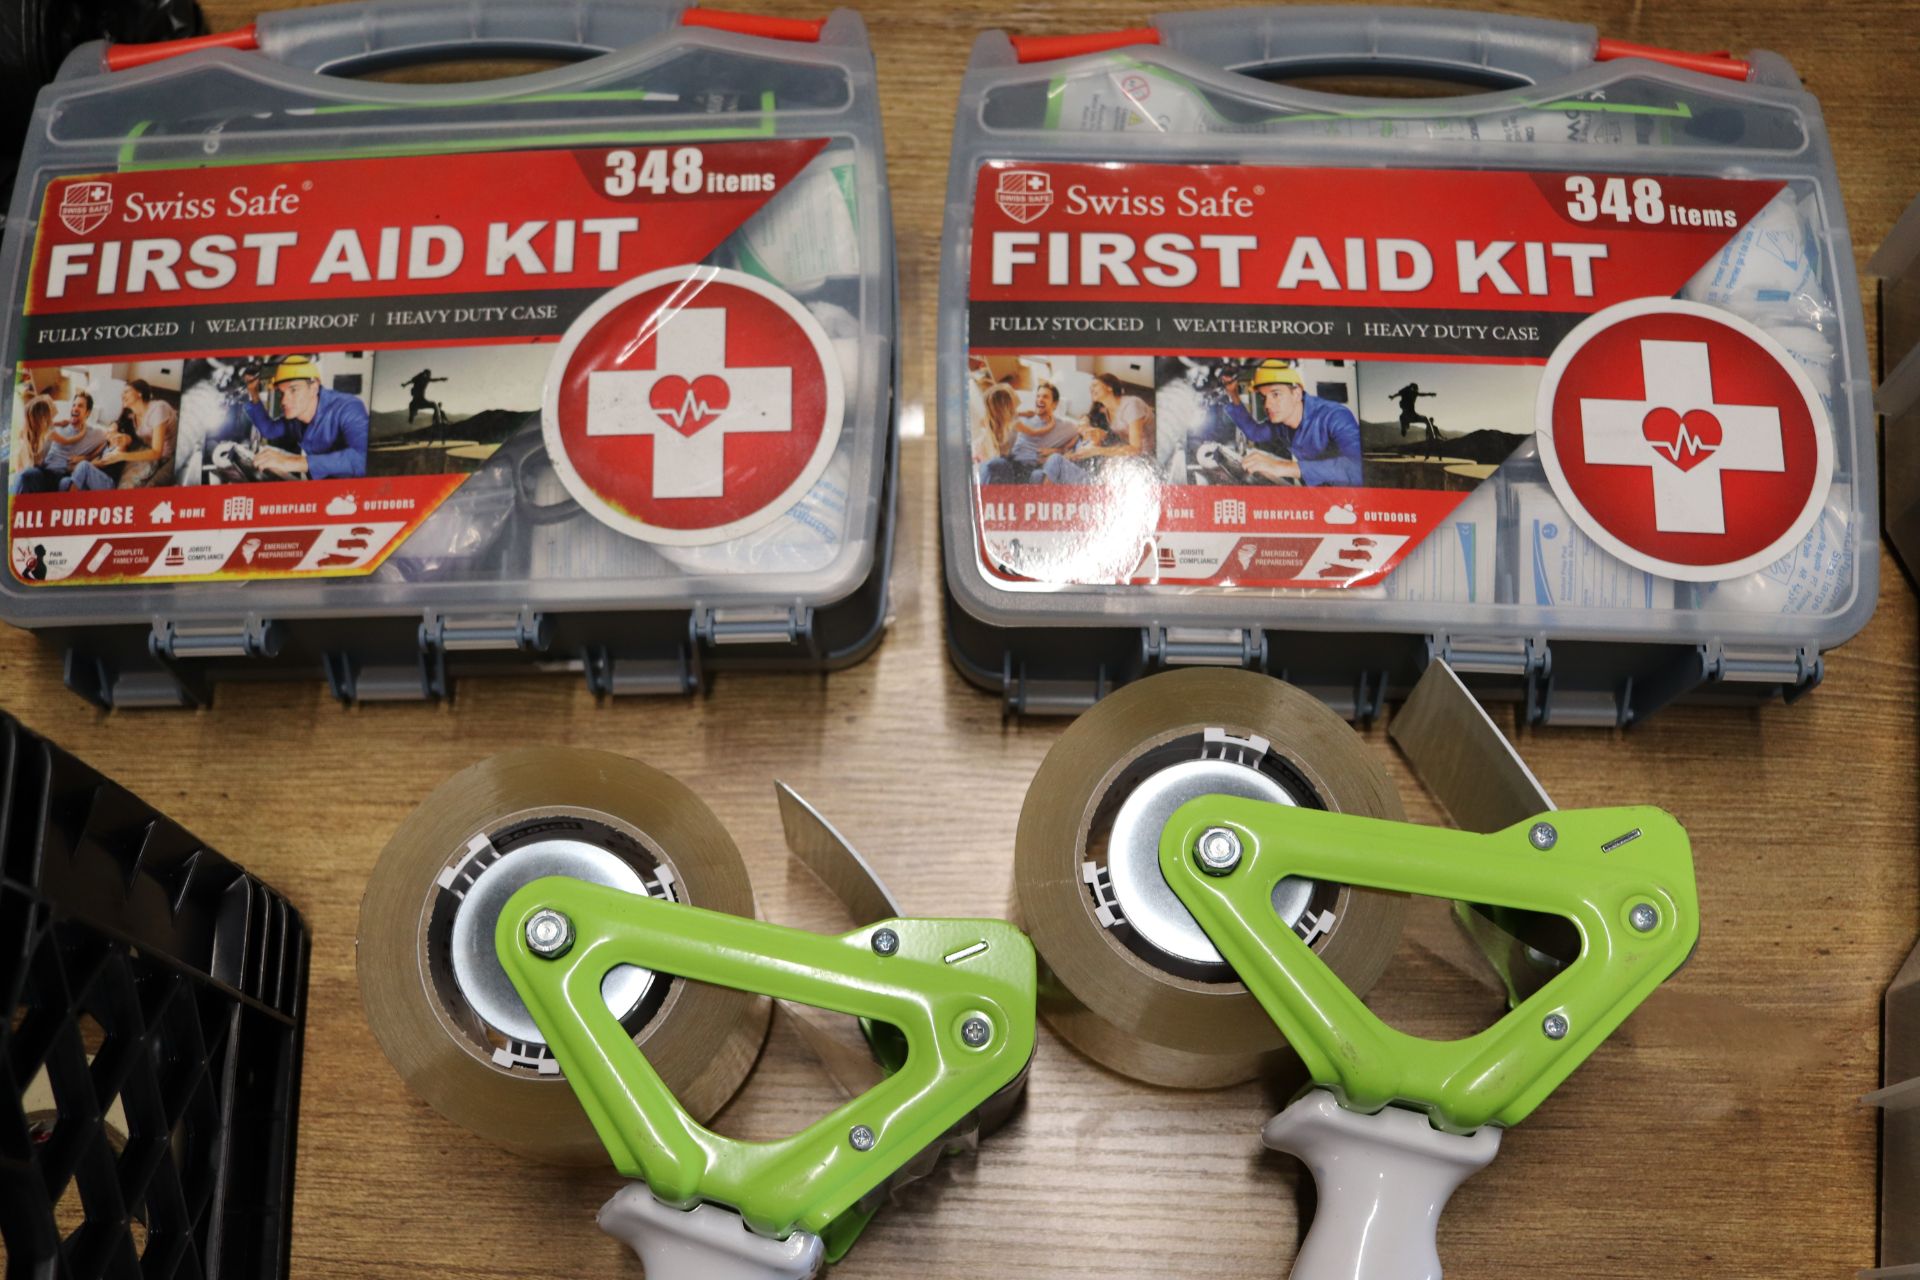 Two Uline tape dispensers and two first aid kits